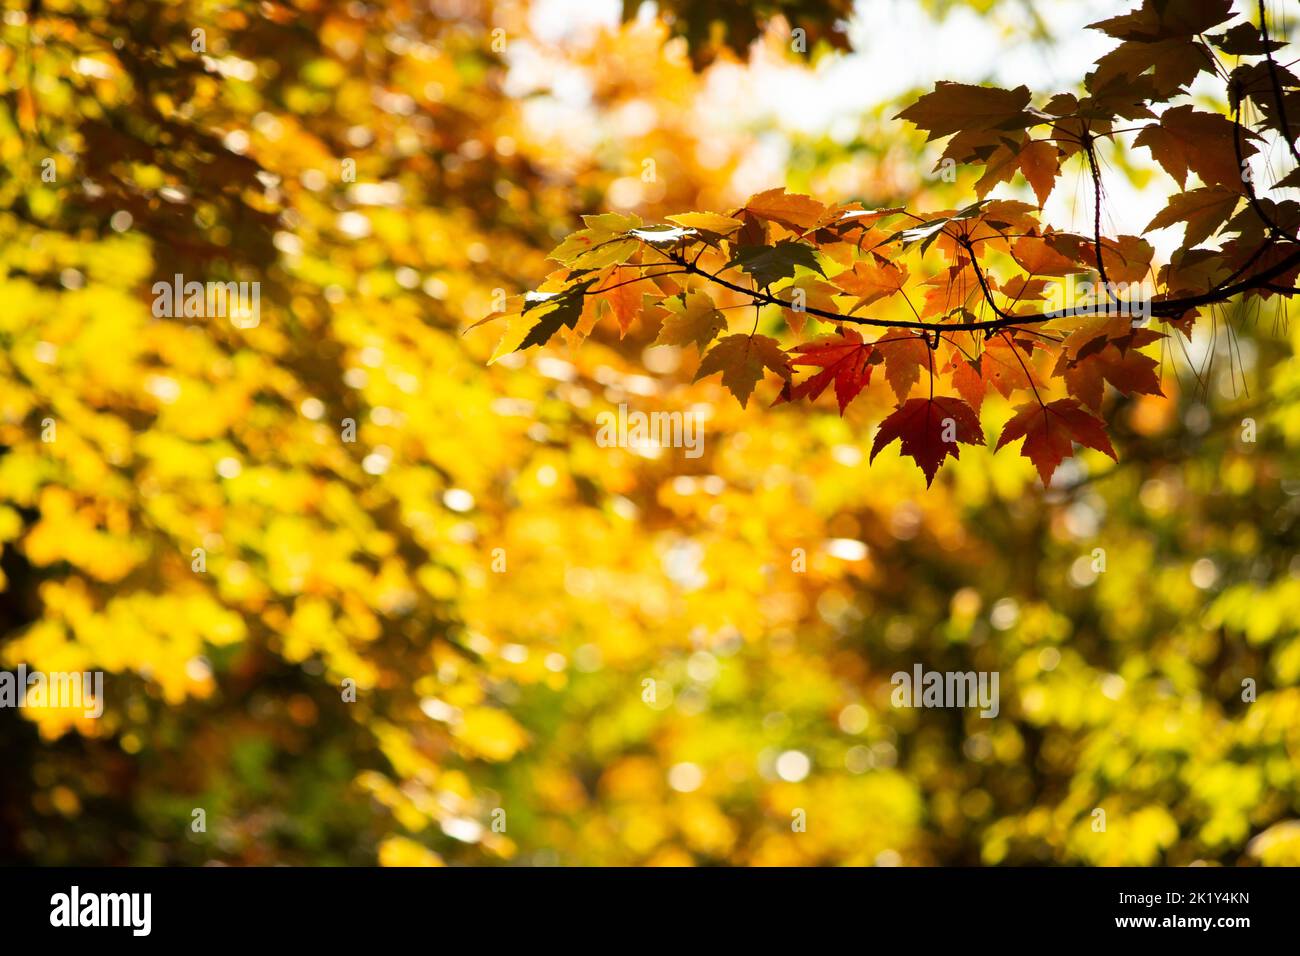 Marmalade leaves extend on a branch on a background of gold. Autumn in all its glory. Stock Photo